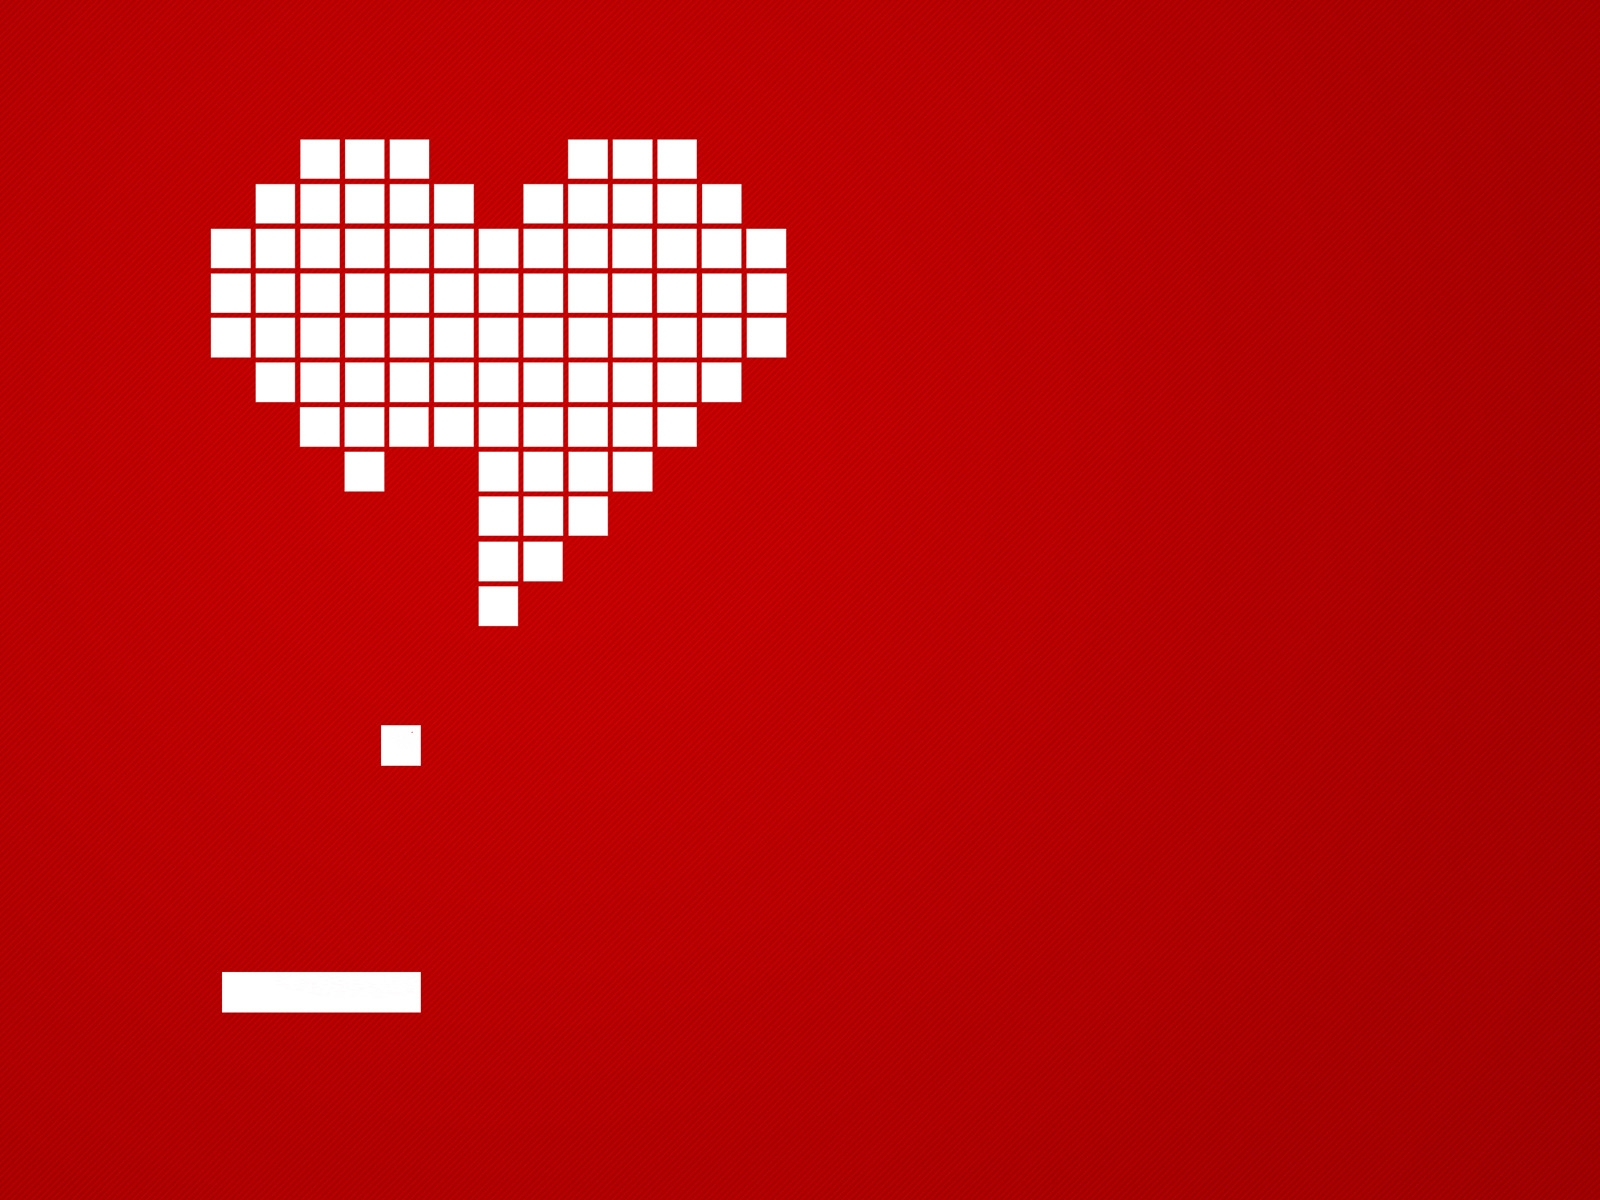 Heart Gaming for 1600 x 1200 resolution